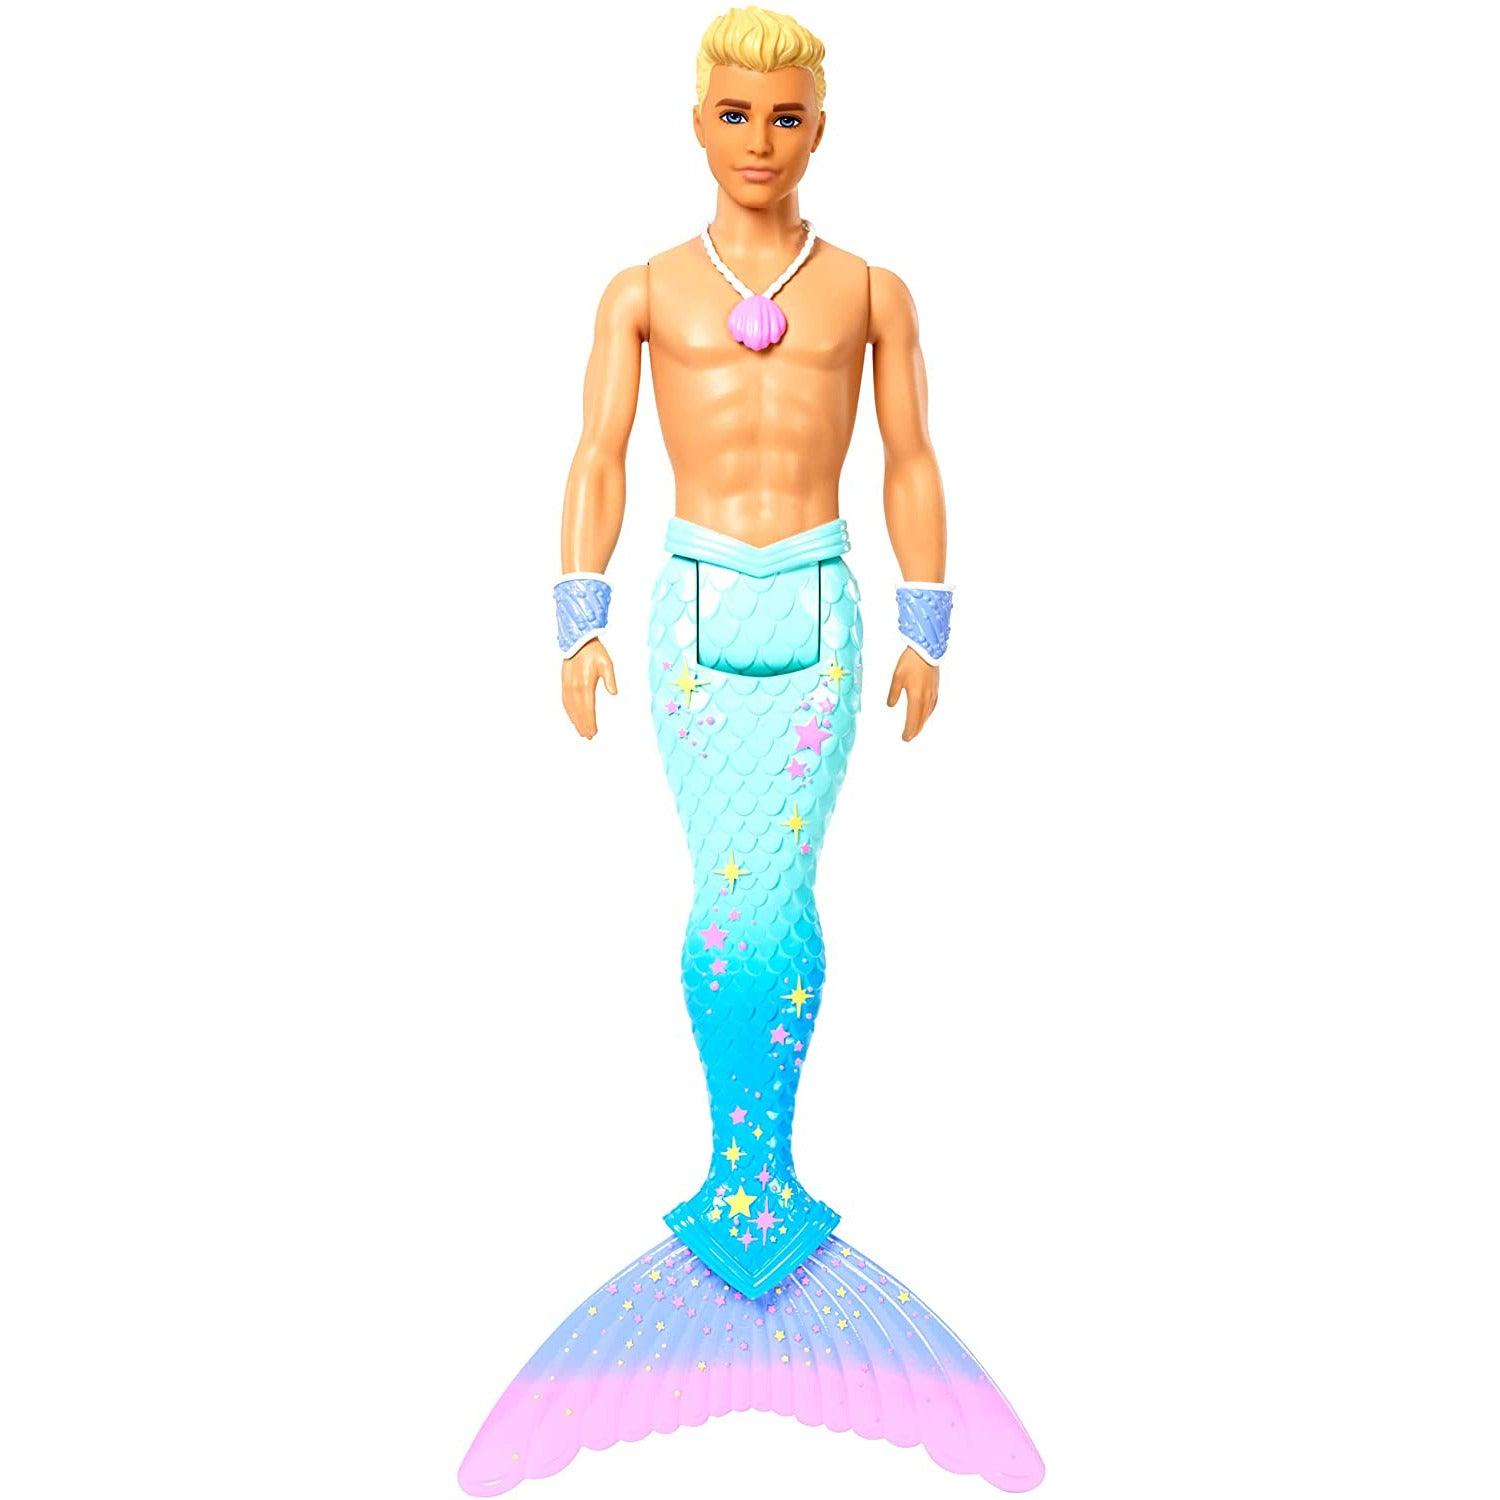 Barbie Dreamtopia Merman Doll, Approx. 12-Inch with Blue Rainbow Tail and Blonde Hair